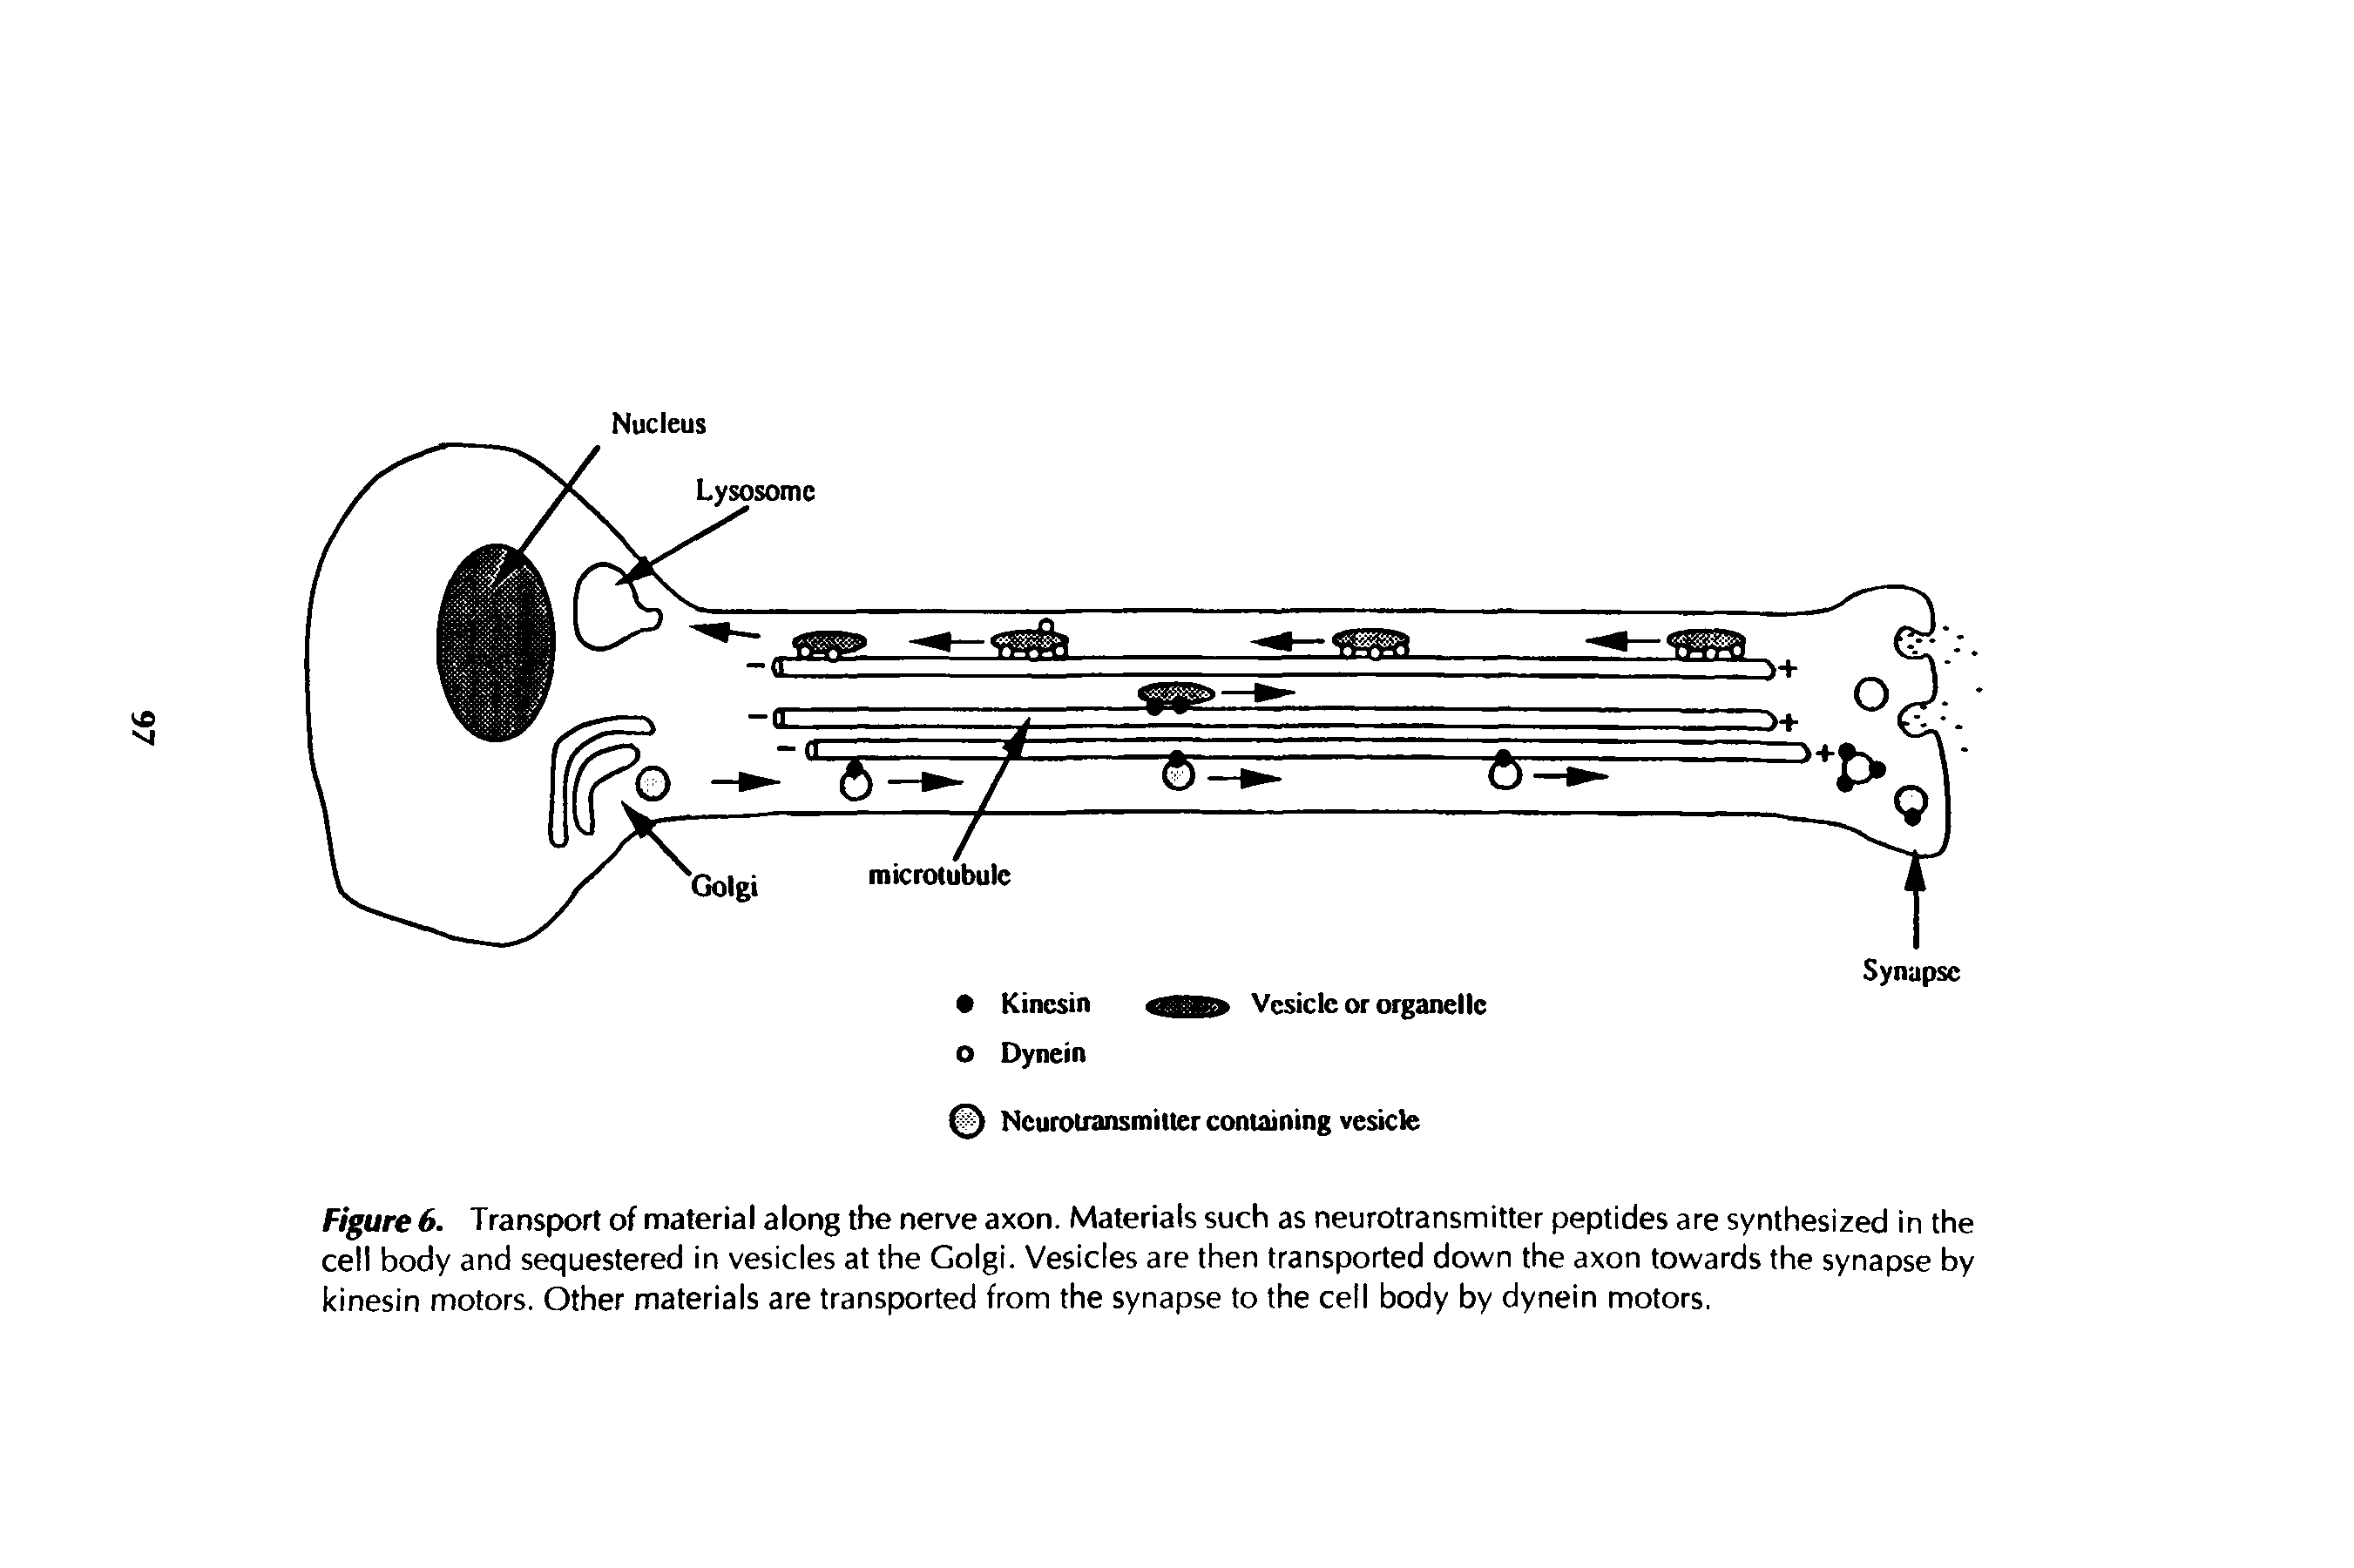 Figure 6. Transport of material along the nerve axon. Materials such as neurotransmitter peptides are synthesized in the cell body and sequestered in vesicles at the Golgi. Vesicles are then transported down the axon towards the synapse by kinesin motors. Other materials are transported from the synapse to the cell body by dynein motors.